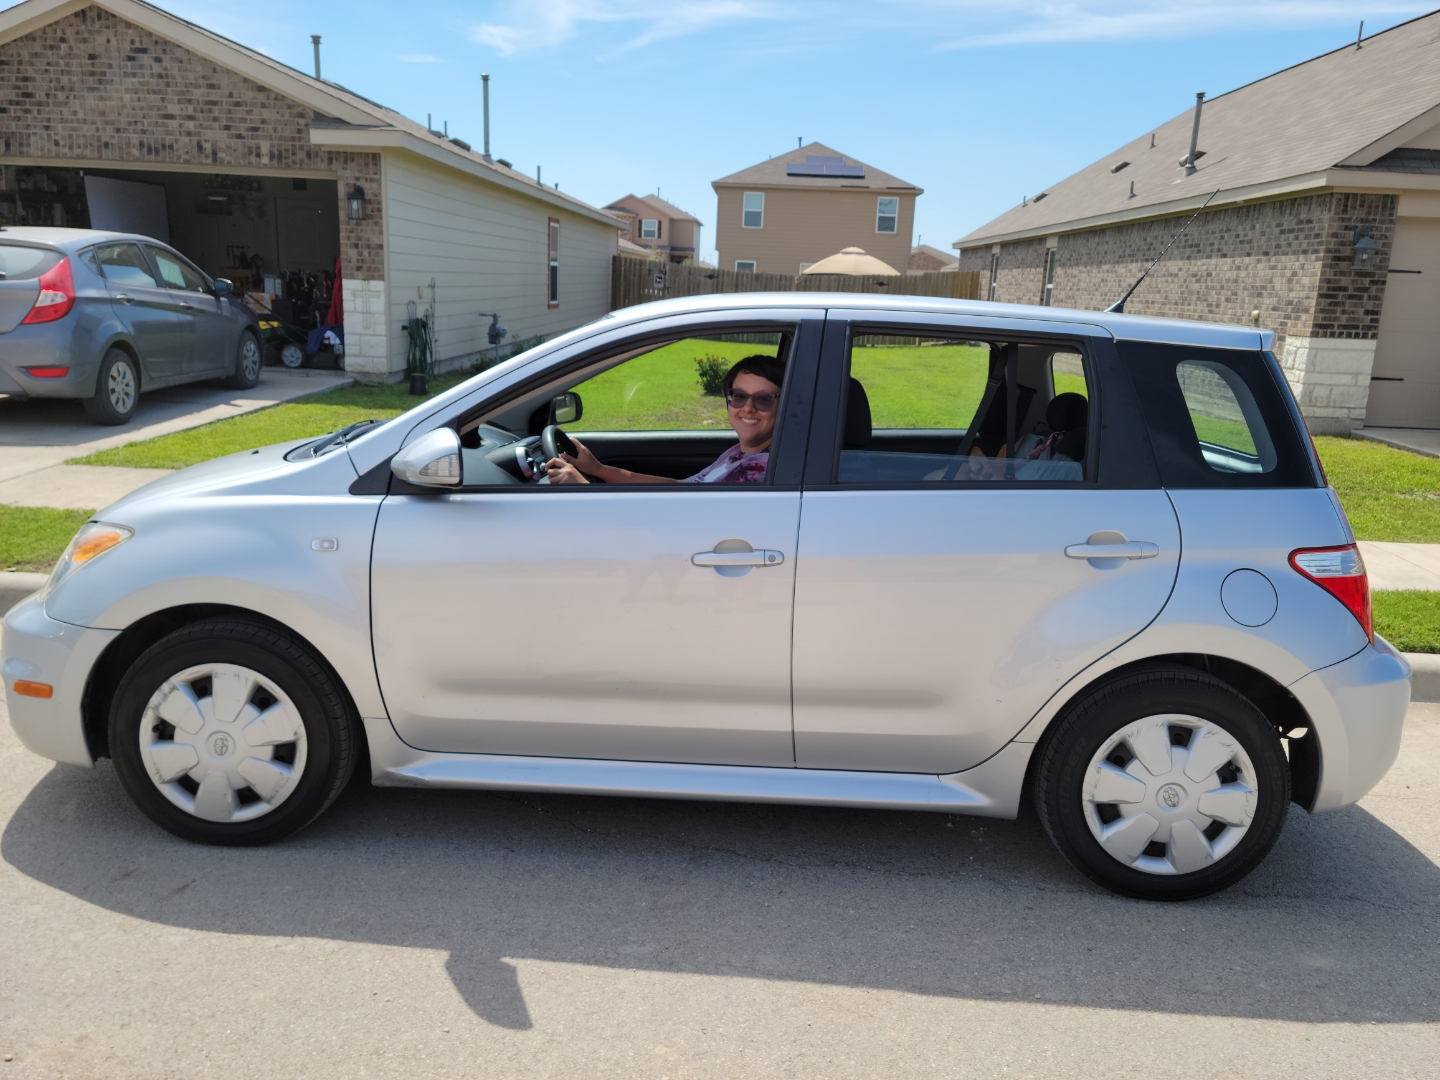 I bought my first car, a 2006 Scion xA! I've named her Sylvia. She only has  54k miles on her, and no history of accidents. I plan to continue taking  really good